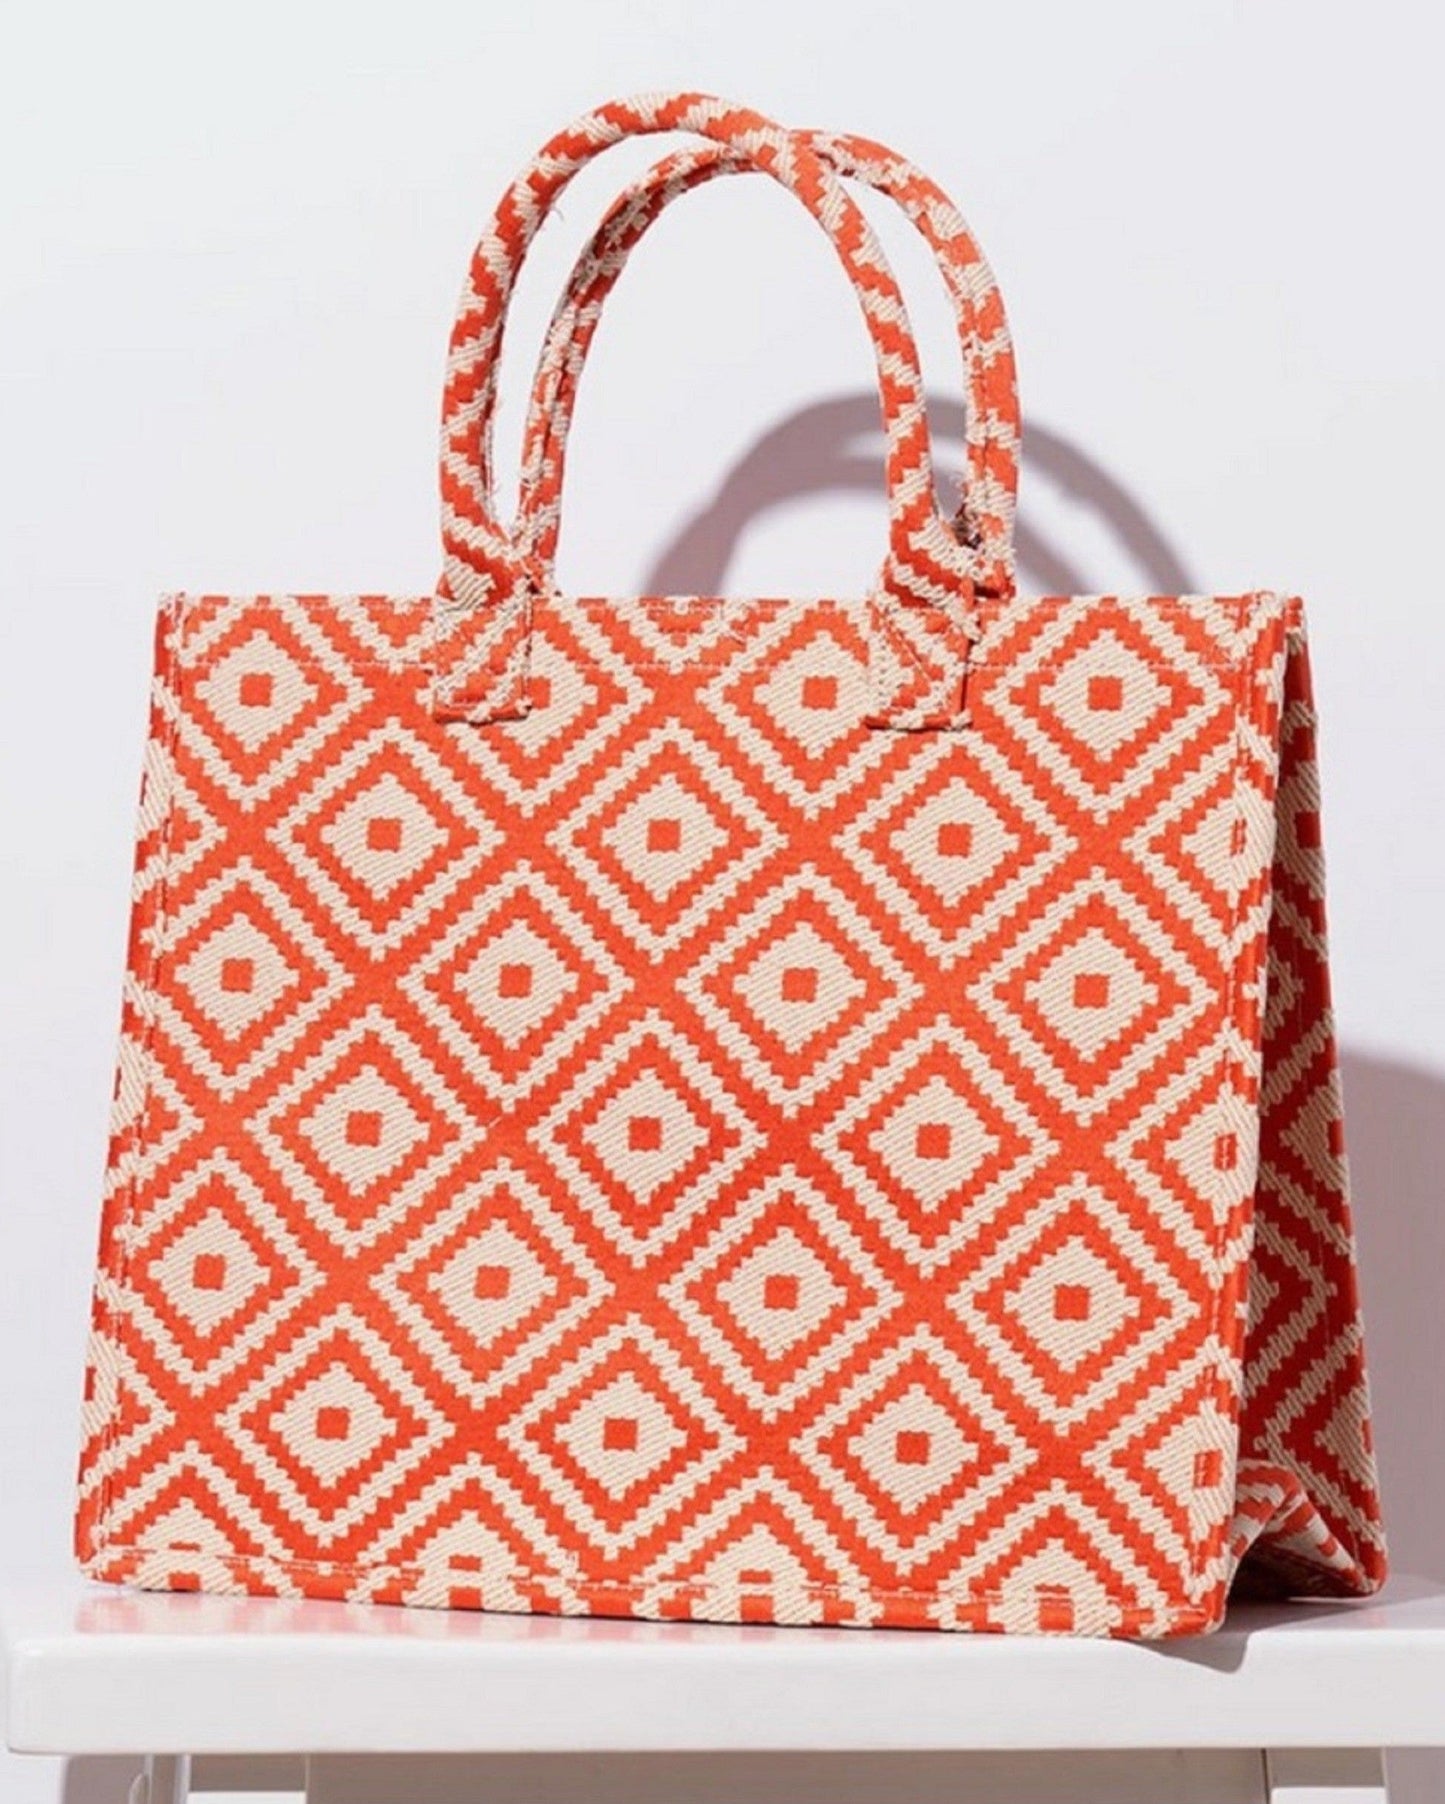 tote bag for women coral cute handbag perfect for summer or cold season